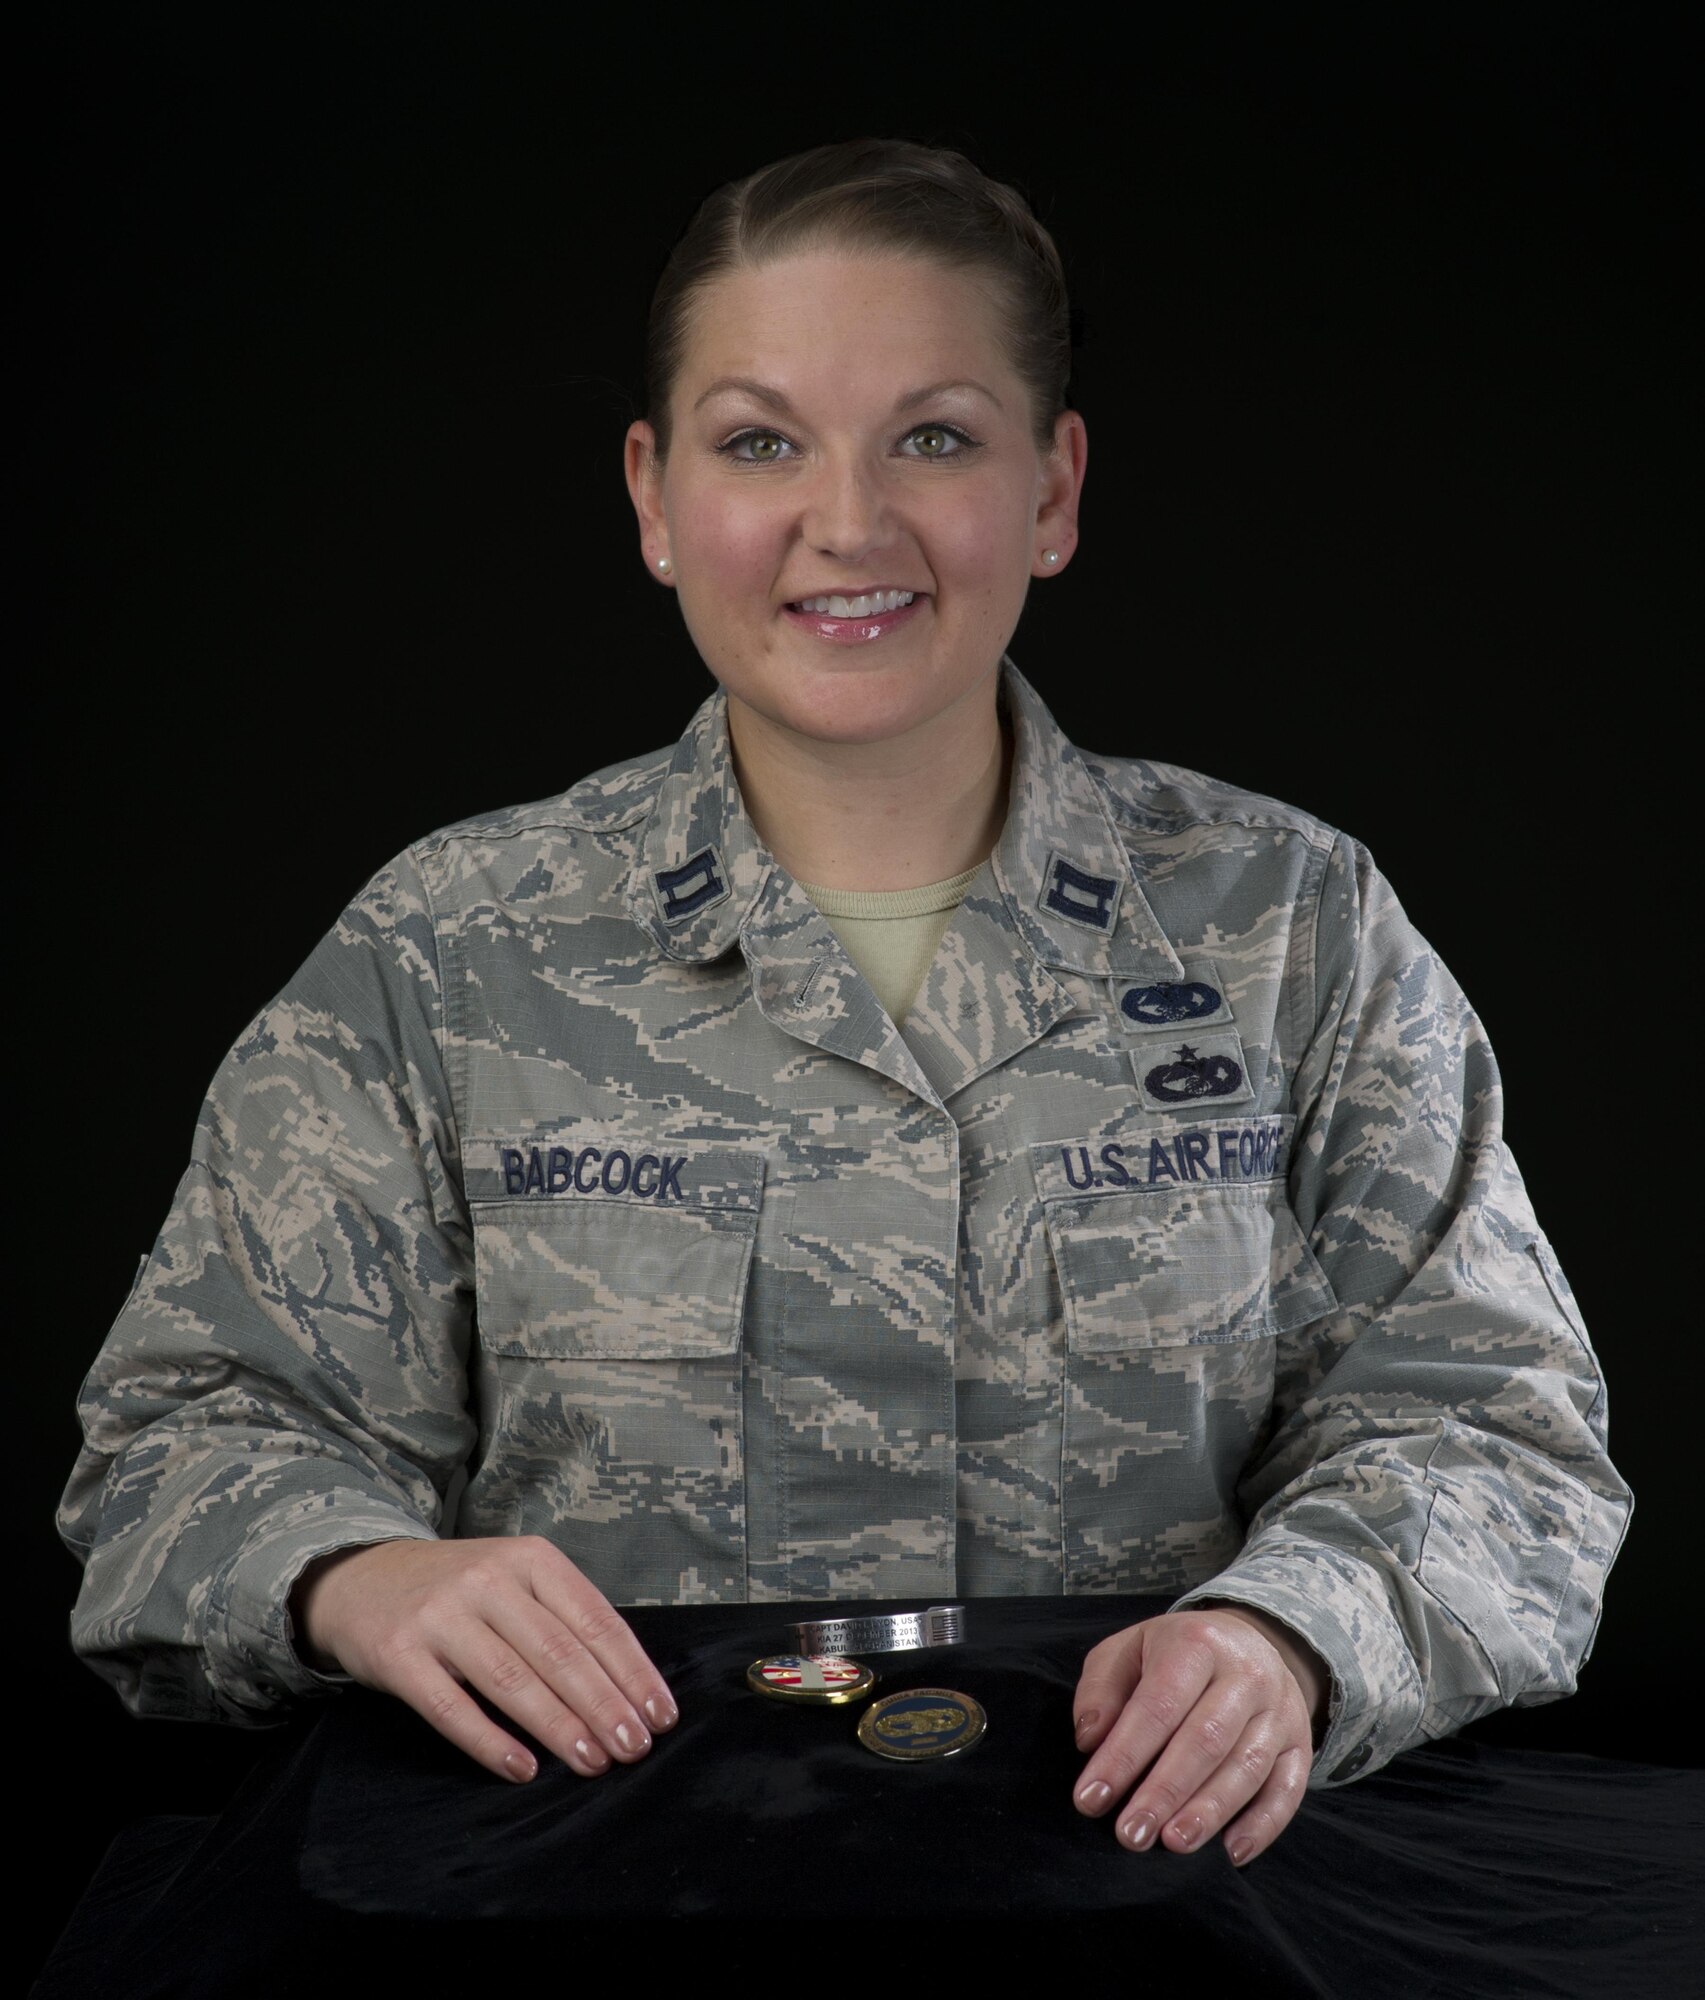 Capt. Leanne Babcock, 349th Logistics Readiness Squadron, operations officer, displays the tokens that she always keeps near, July 27, 2017 Travis Air Force Base, Calif. Men and women serving their country in all branches of the military have traditionally kept meaningful mementos or talismans close to them for good luck, as reminders, to bring comfort or other deeply felt personal reasons. (U.S. Air Force photo/ Heide Couch)